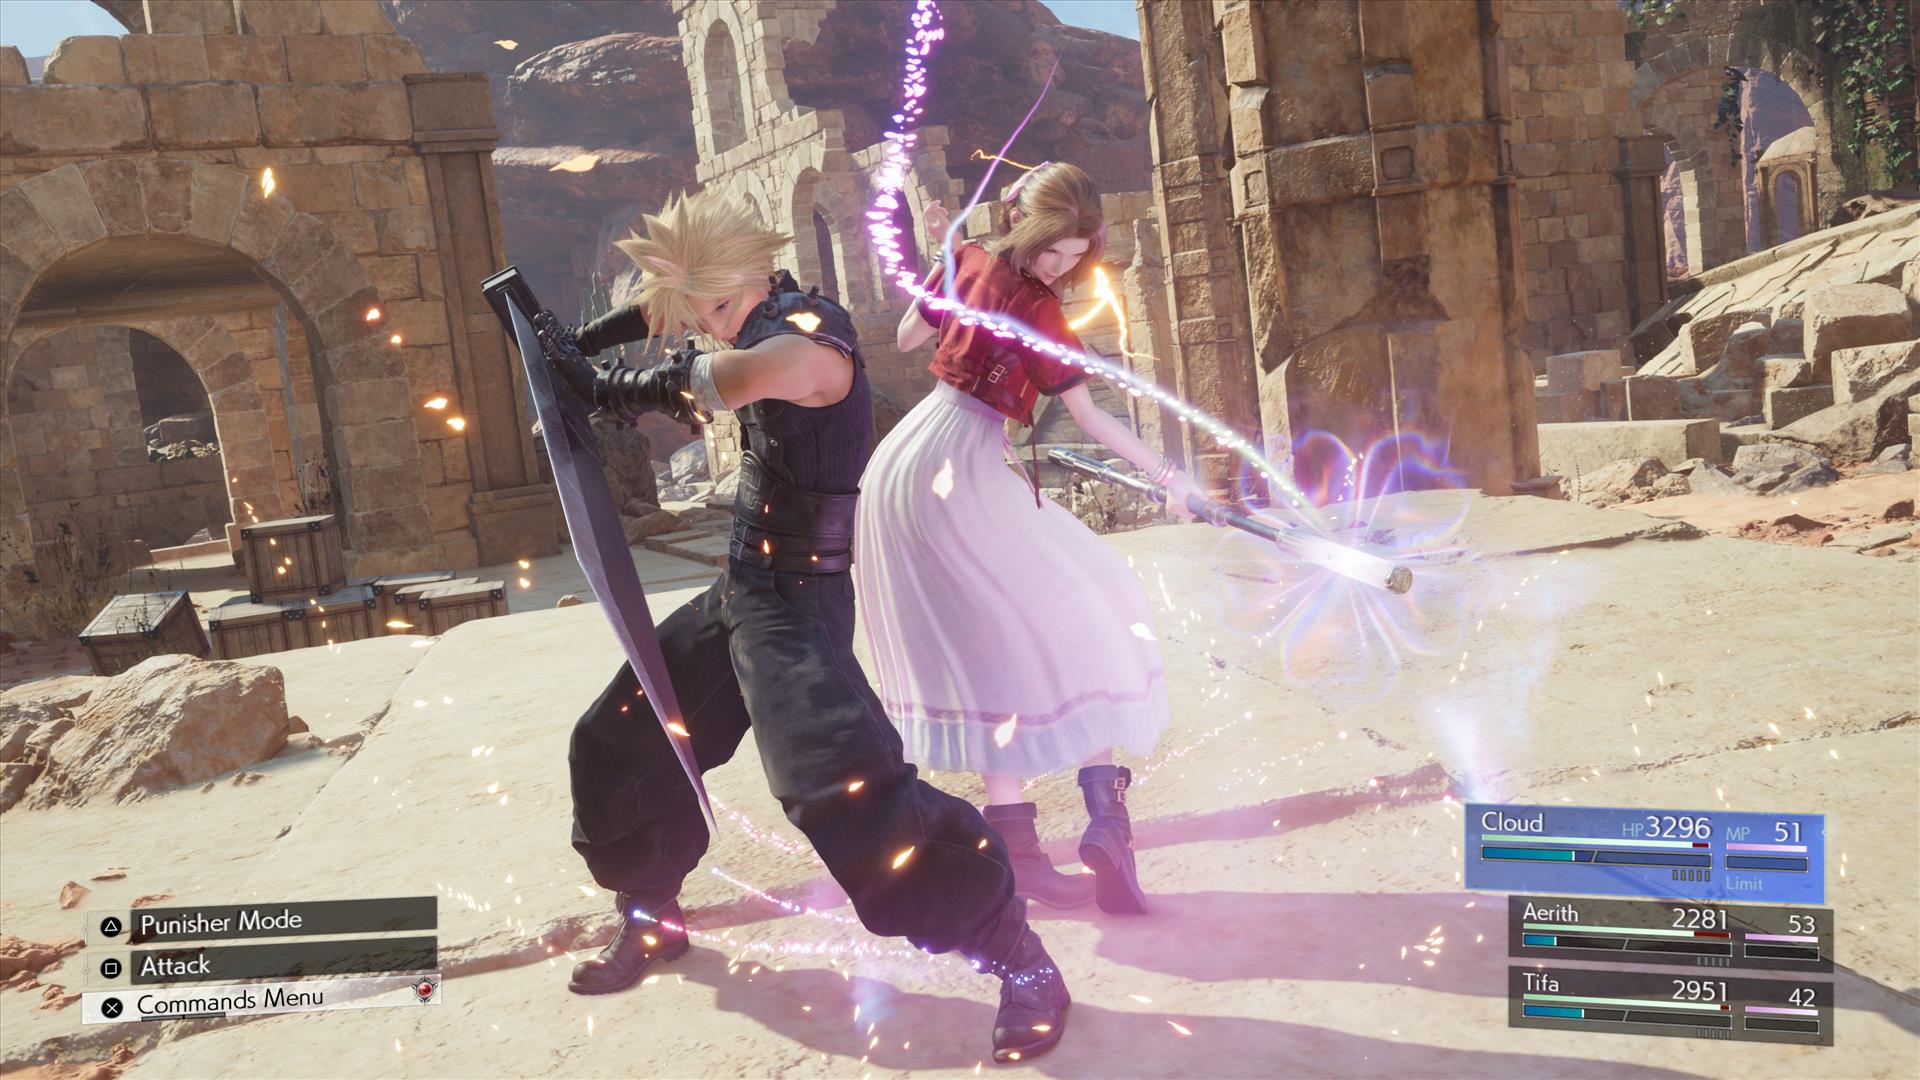 DISCOVER A VIBRANT AND VAST WORLD IN FINAL FANTASY VII REBIRTH , COMING IN  EARLY 2024 TO PLAYSTATION 5 - Square Enix North America Press Hub